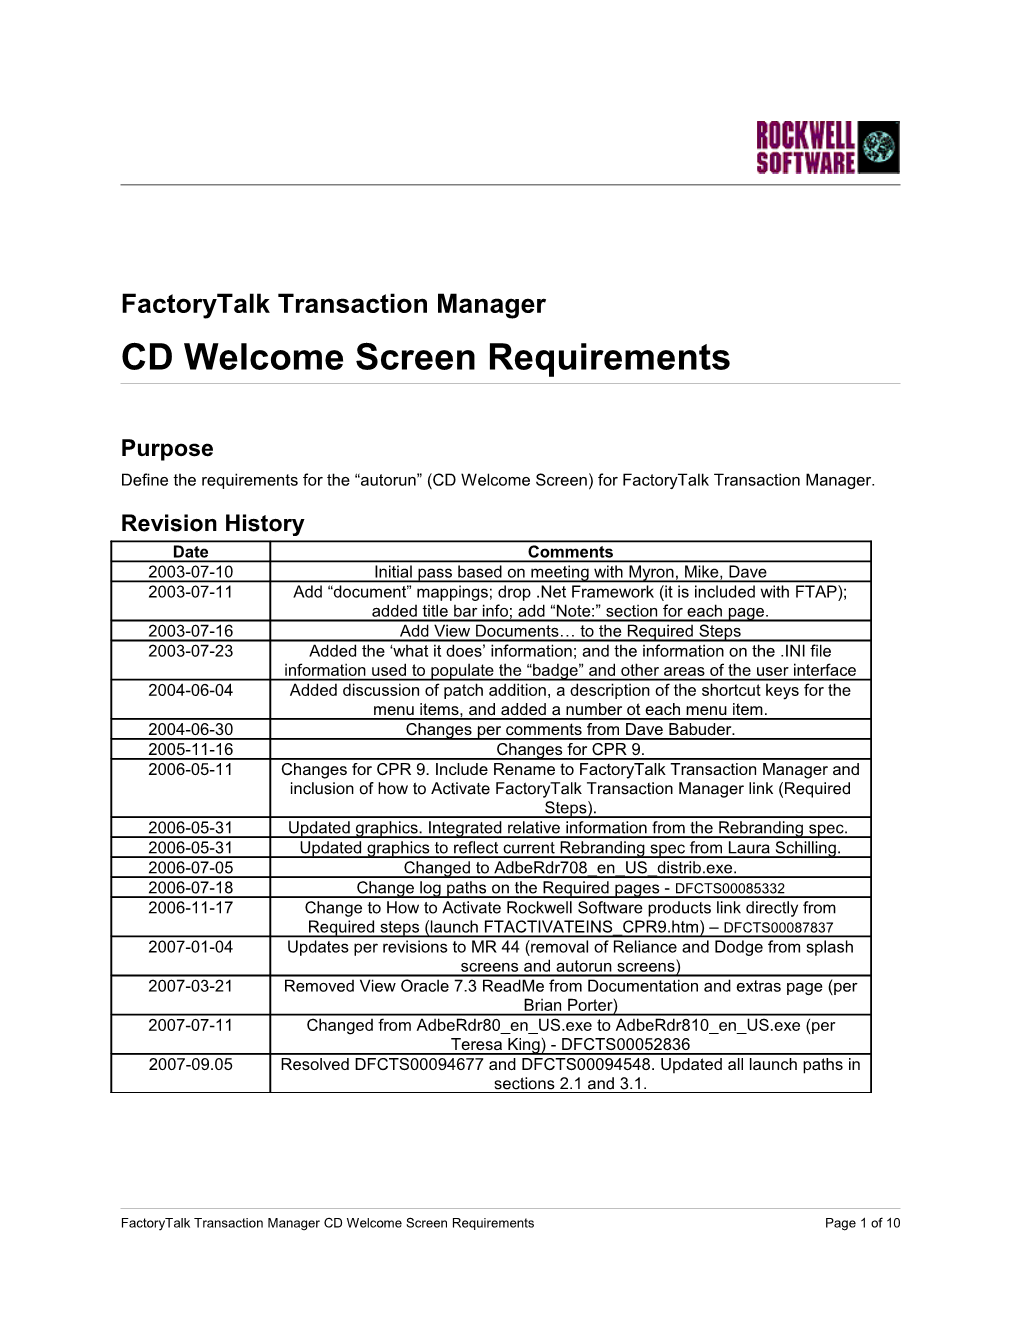 CD Welcome Screen Requirements